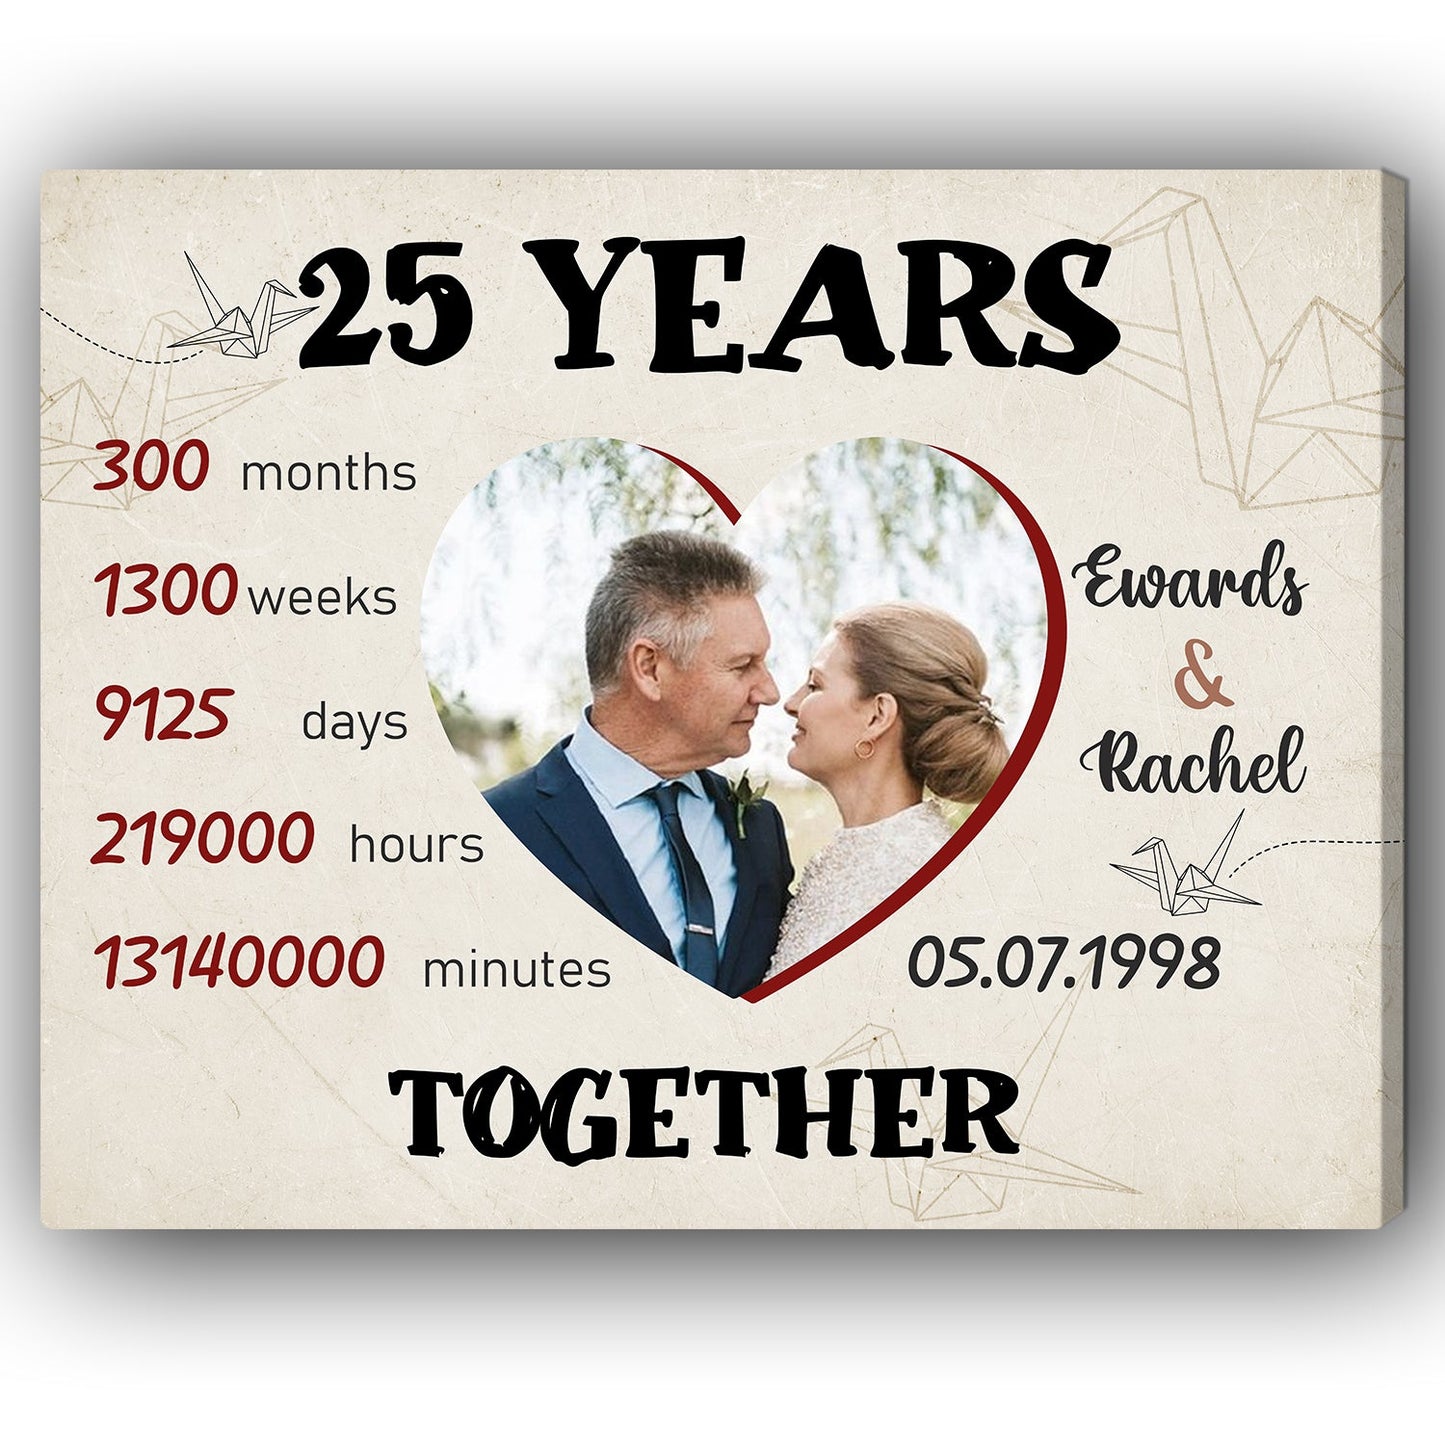 25 Years Together - Personalized 25 Year Anniversary gift for him for her - Custom Canvas - MyMindfulGifts